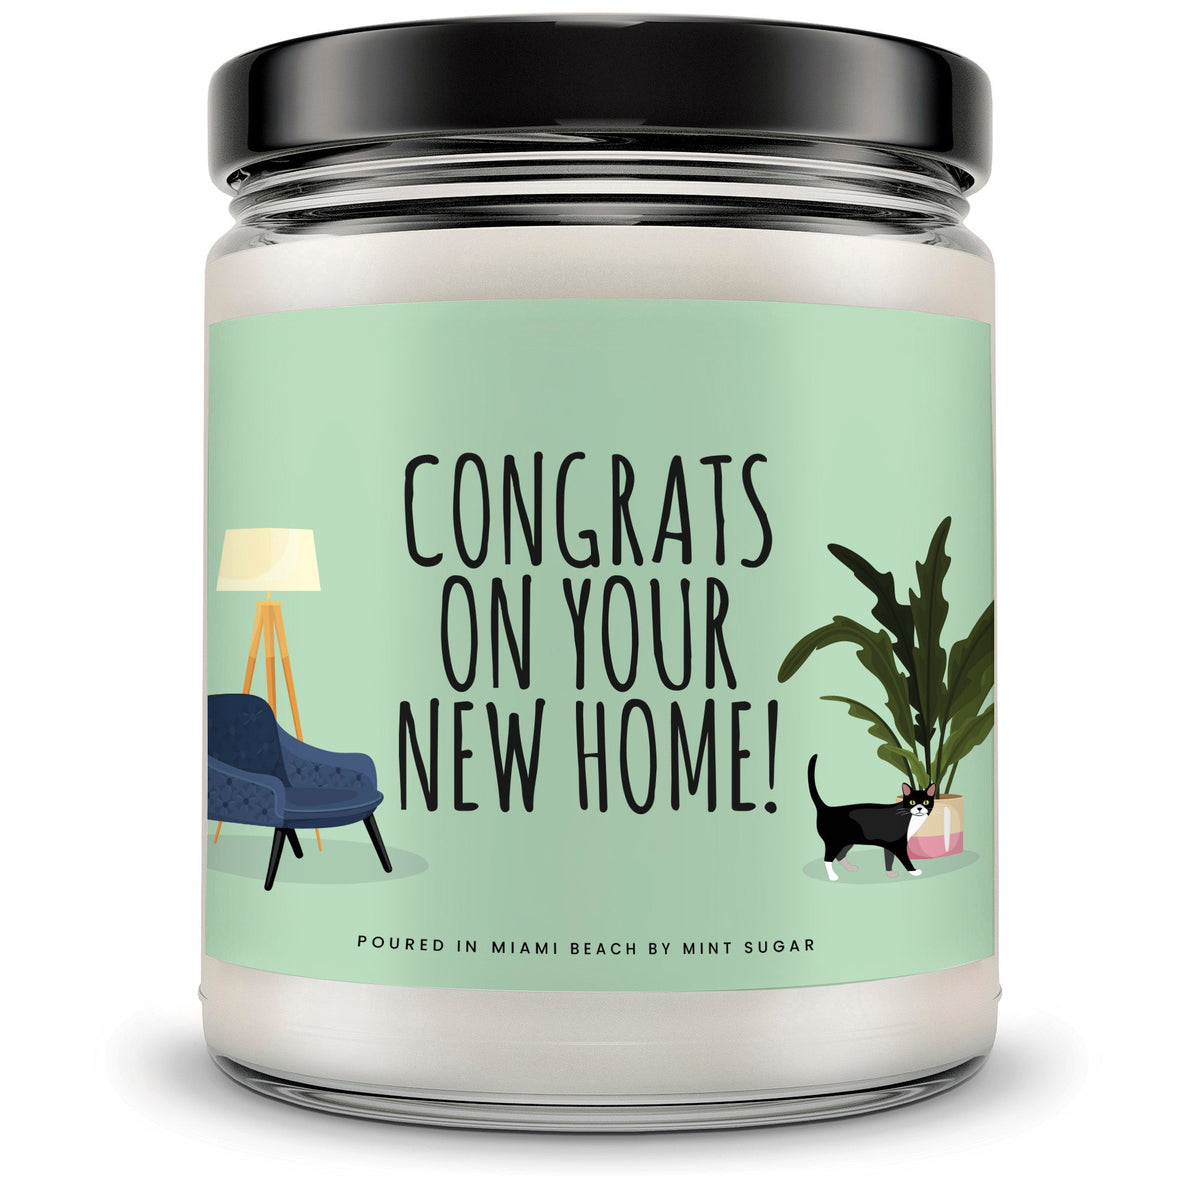 Congrats on your New Home! Candle - Mint Sugar Candle